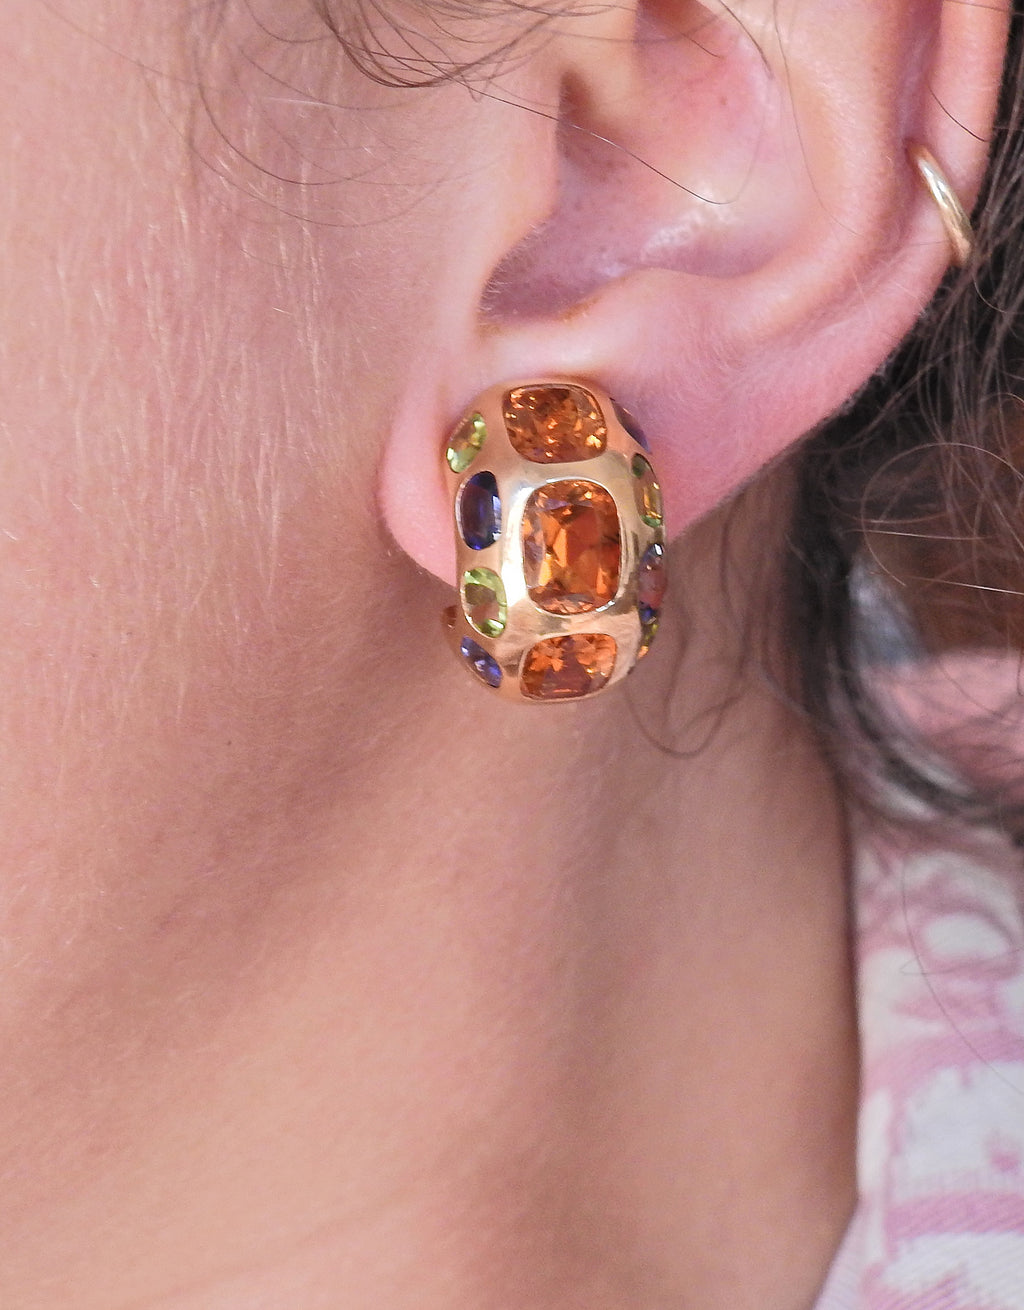  Fashion jewelry floral design rhinestone camellia earrings  studs for women : Clothing, Shoes & Jewelry